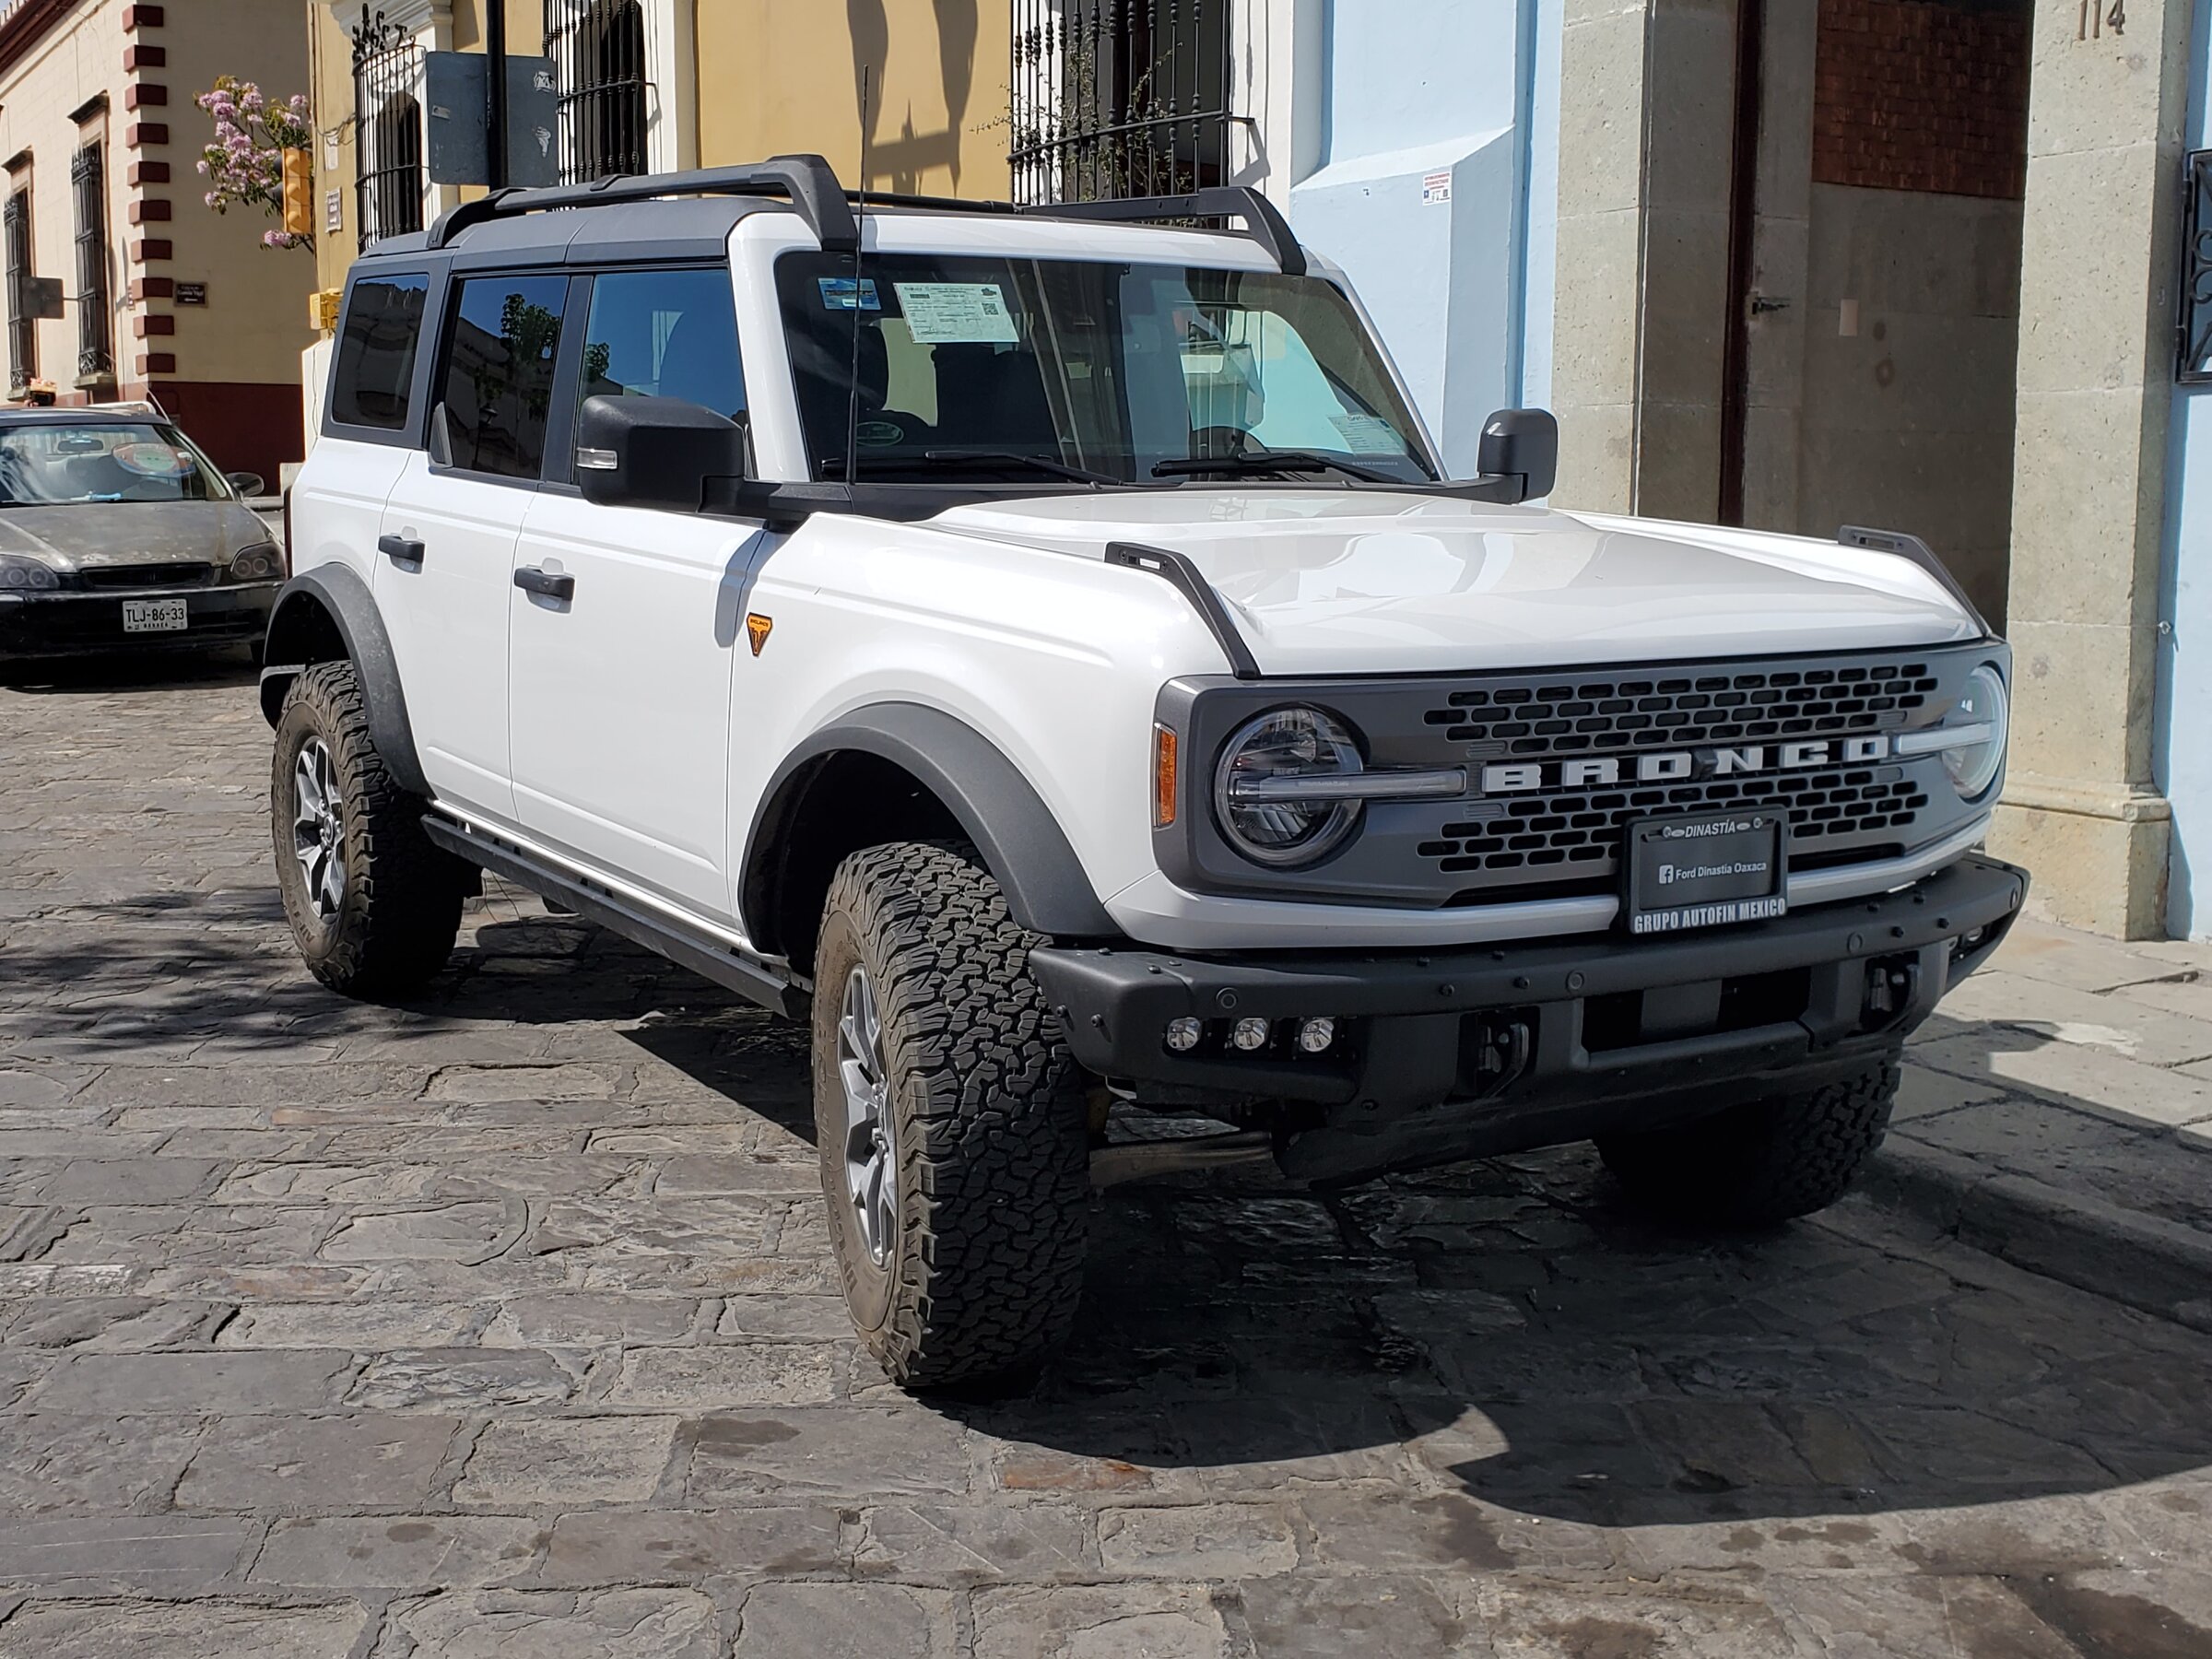 Ford Bronco Bronco Spotted in Oaxaca Mexico 20220204_142123